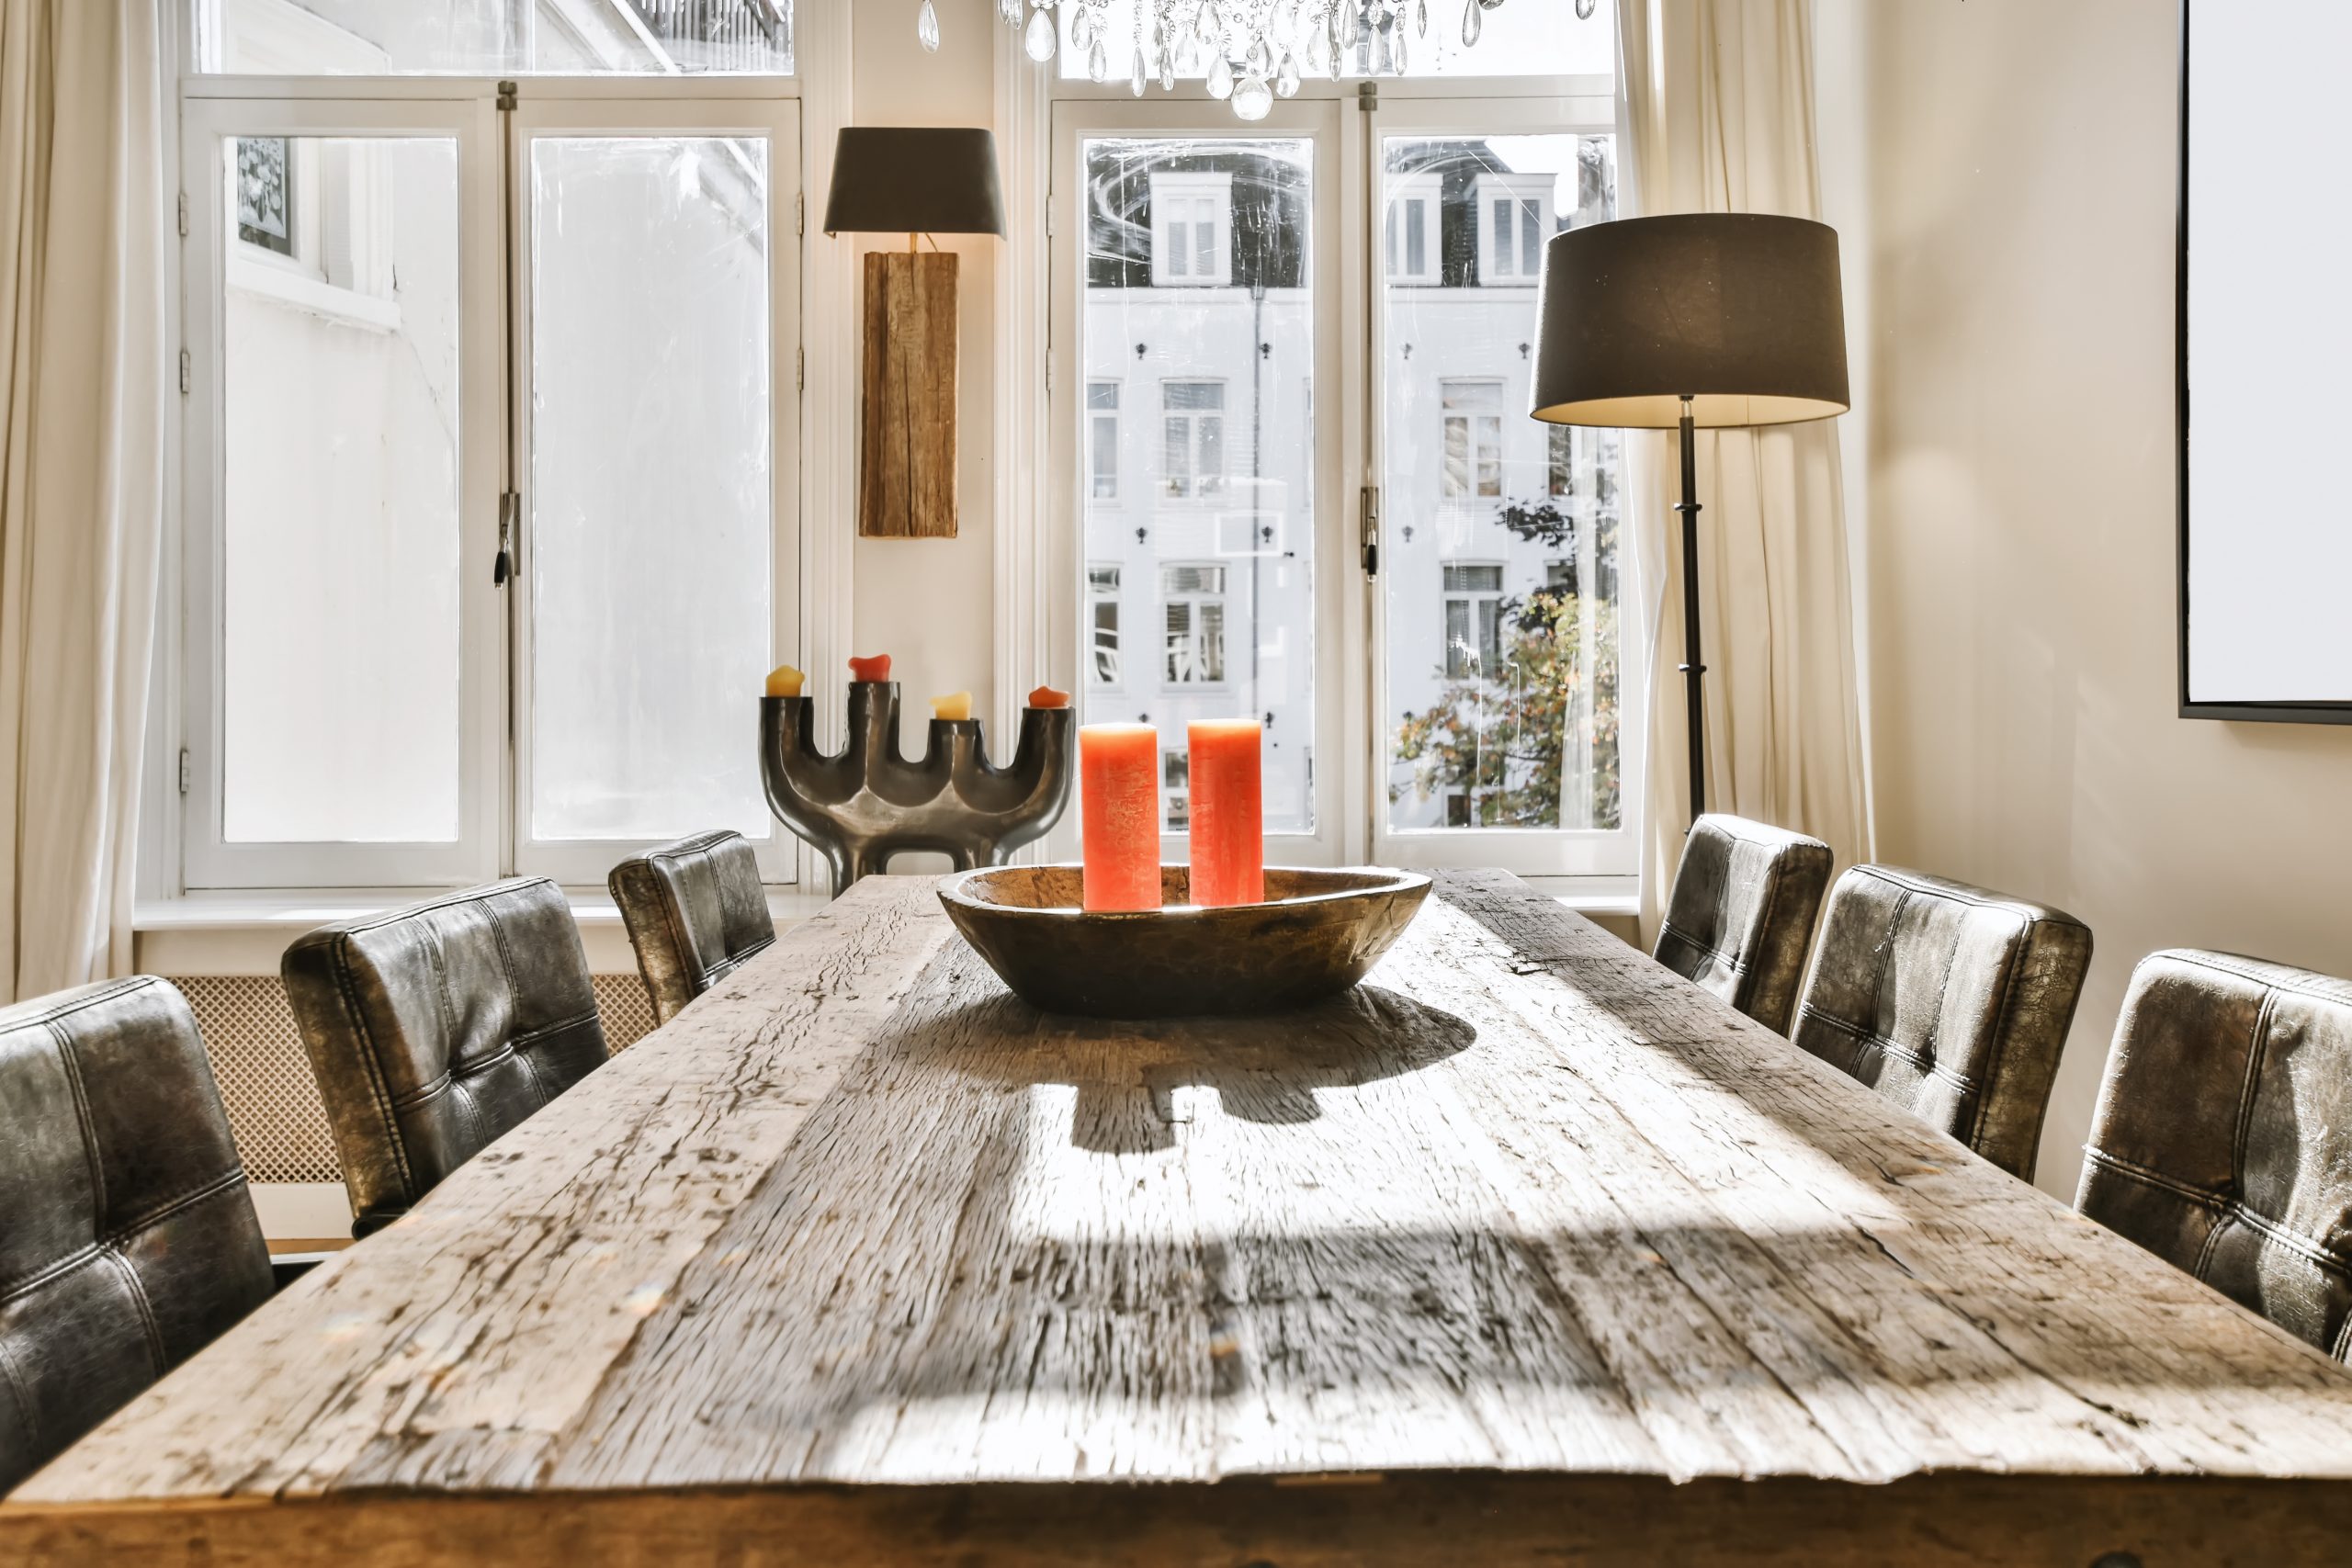 dining table decor ideas with candles